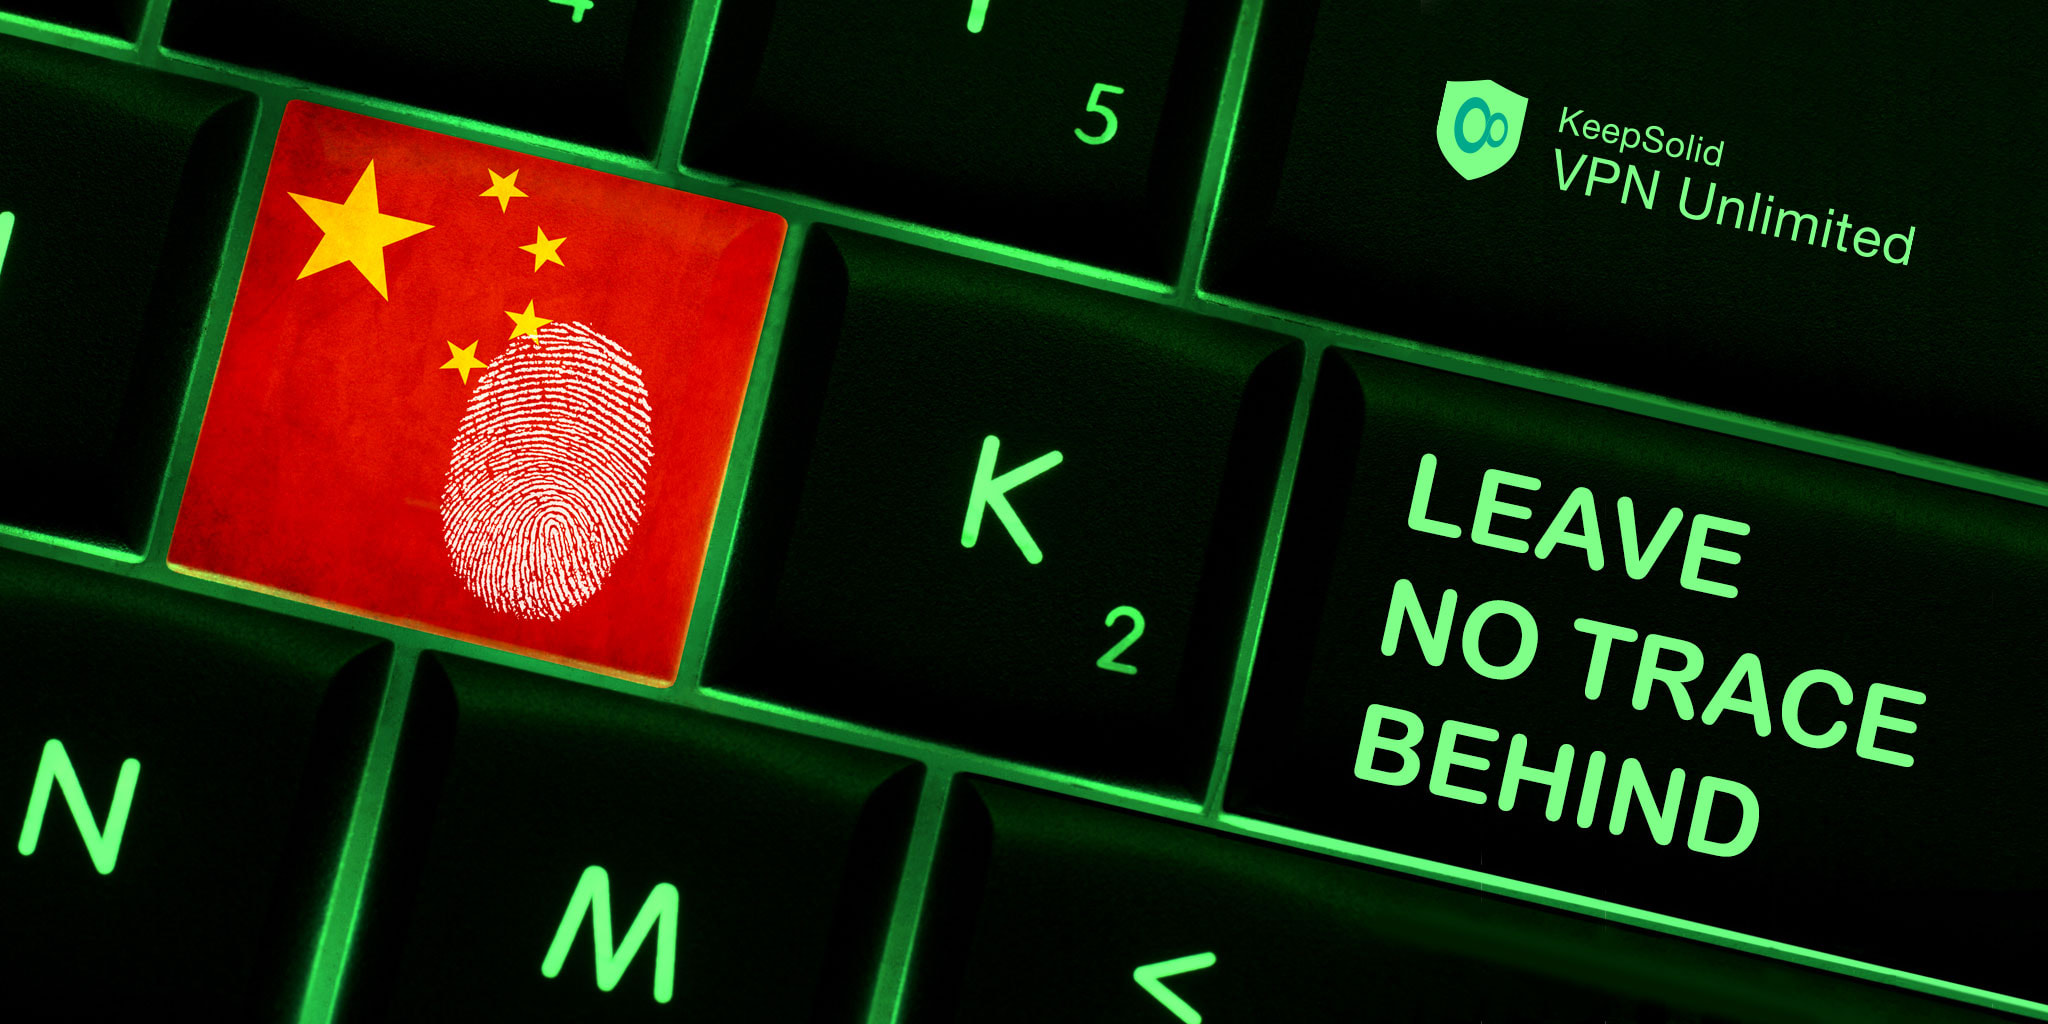 When using VPN for Mac in China, make sure your data activities are stay secure and anonymous